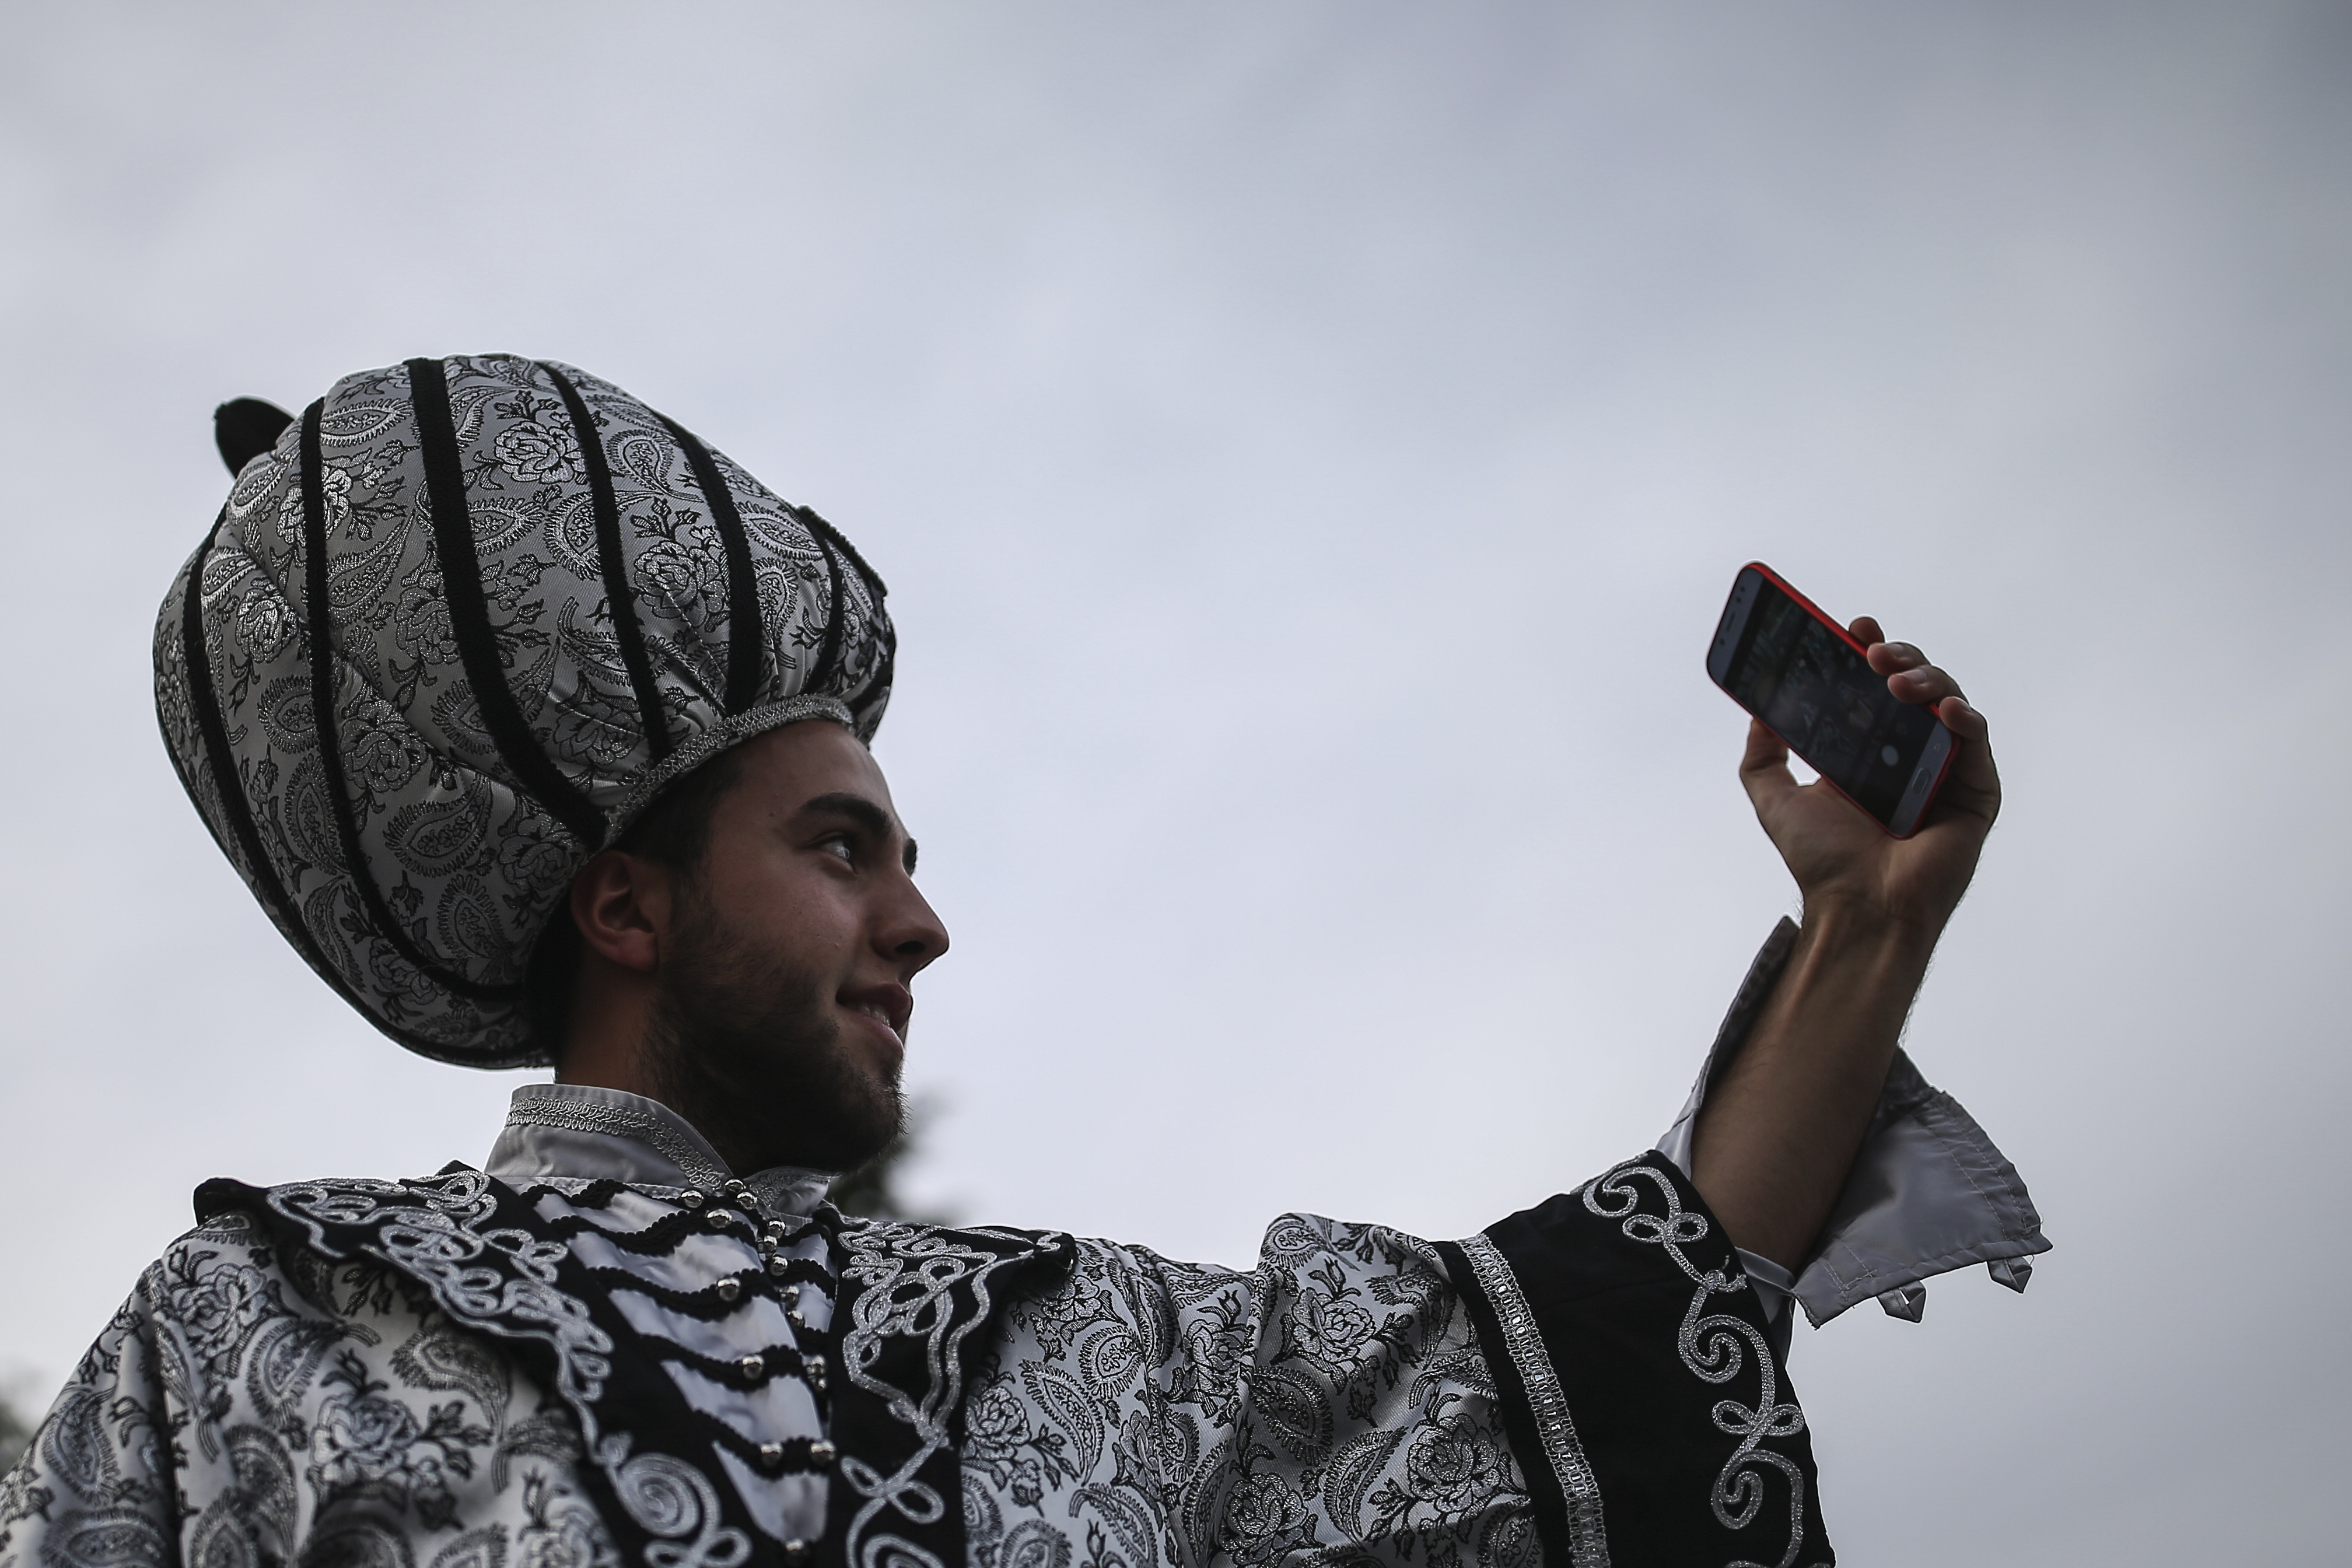 A man in Ottoman attire poses for pictures as people break their fast in the historic Sultanahmet district of Istanbul, Wednesday, May 16, 2018 on the first day of the fasting month of Ramadan. Muslims throughout the world are marking Ramadan - a month of fasting during which the observants abstain from food, drink and other pleasures from sunrise to sunset. After an obligatory sunset prayer, a large feast known as 'iftar' is shared with family and friends. (AP Photo/Emrah Gurel)